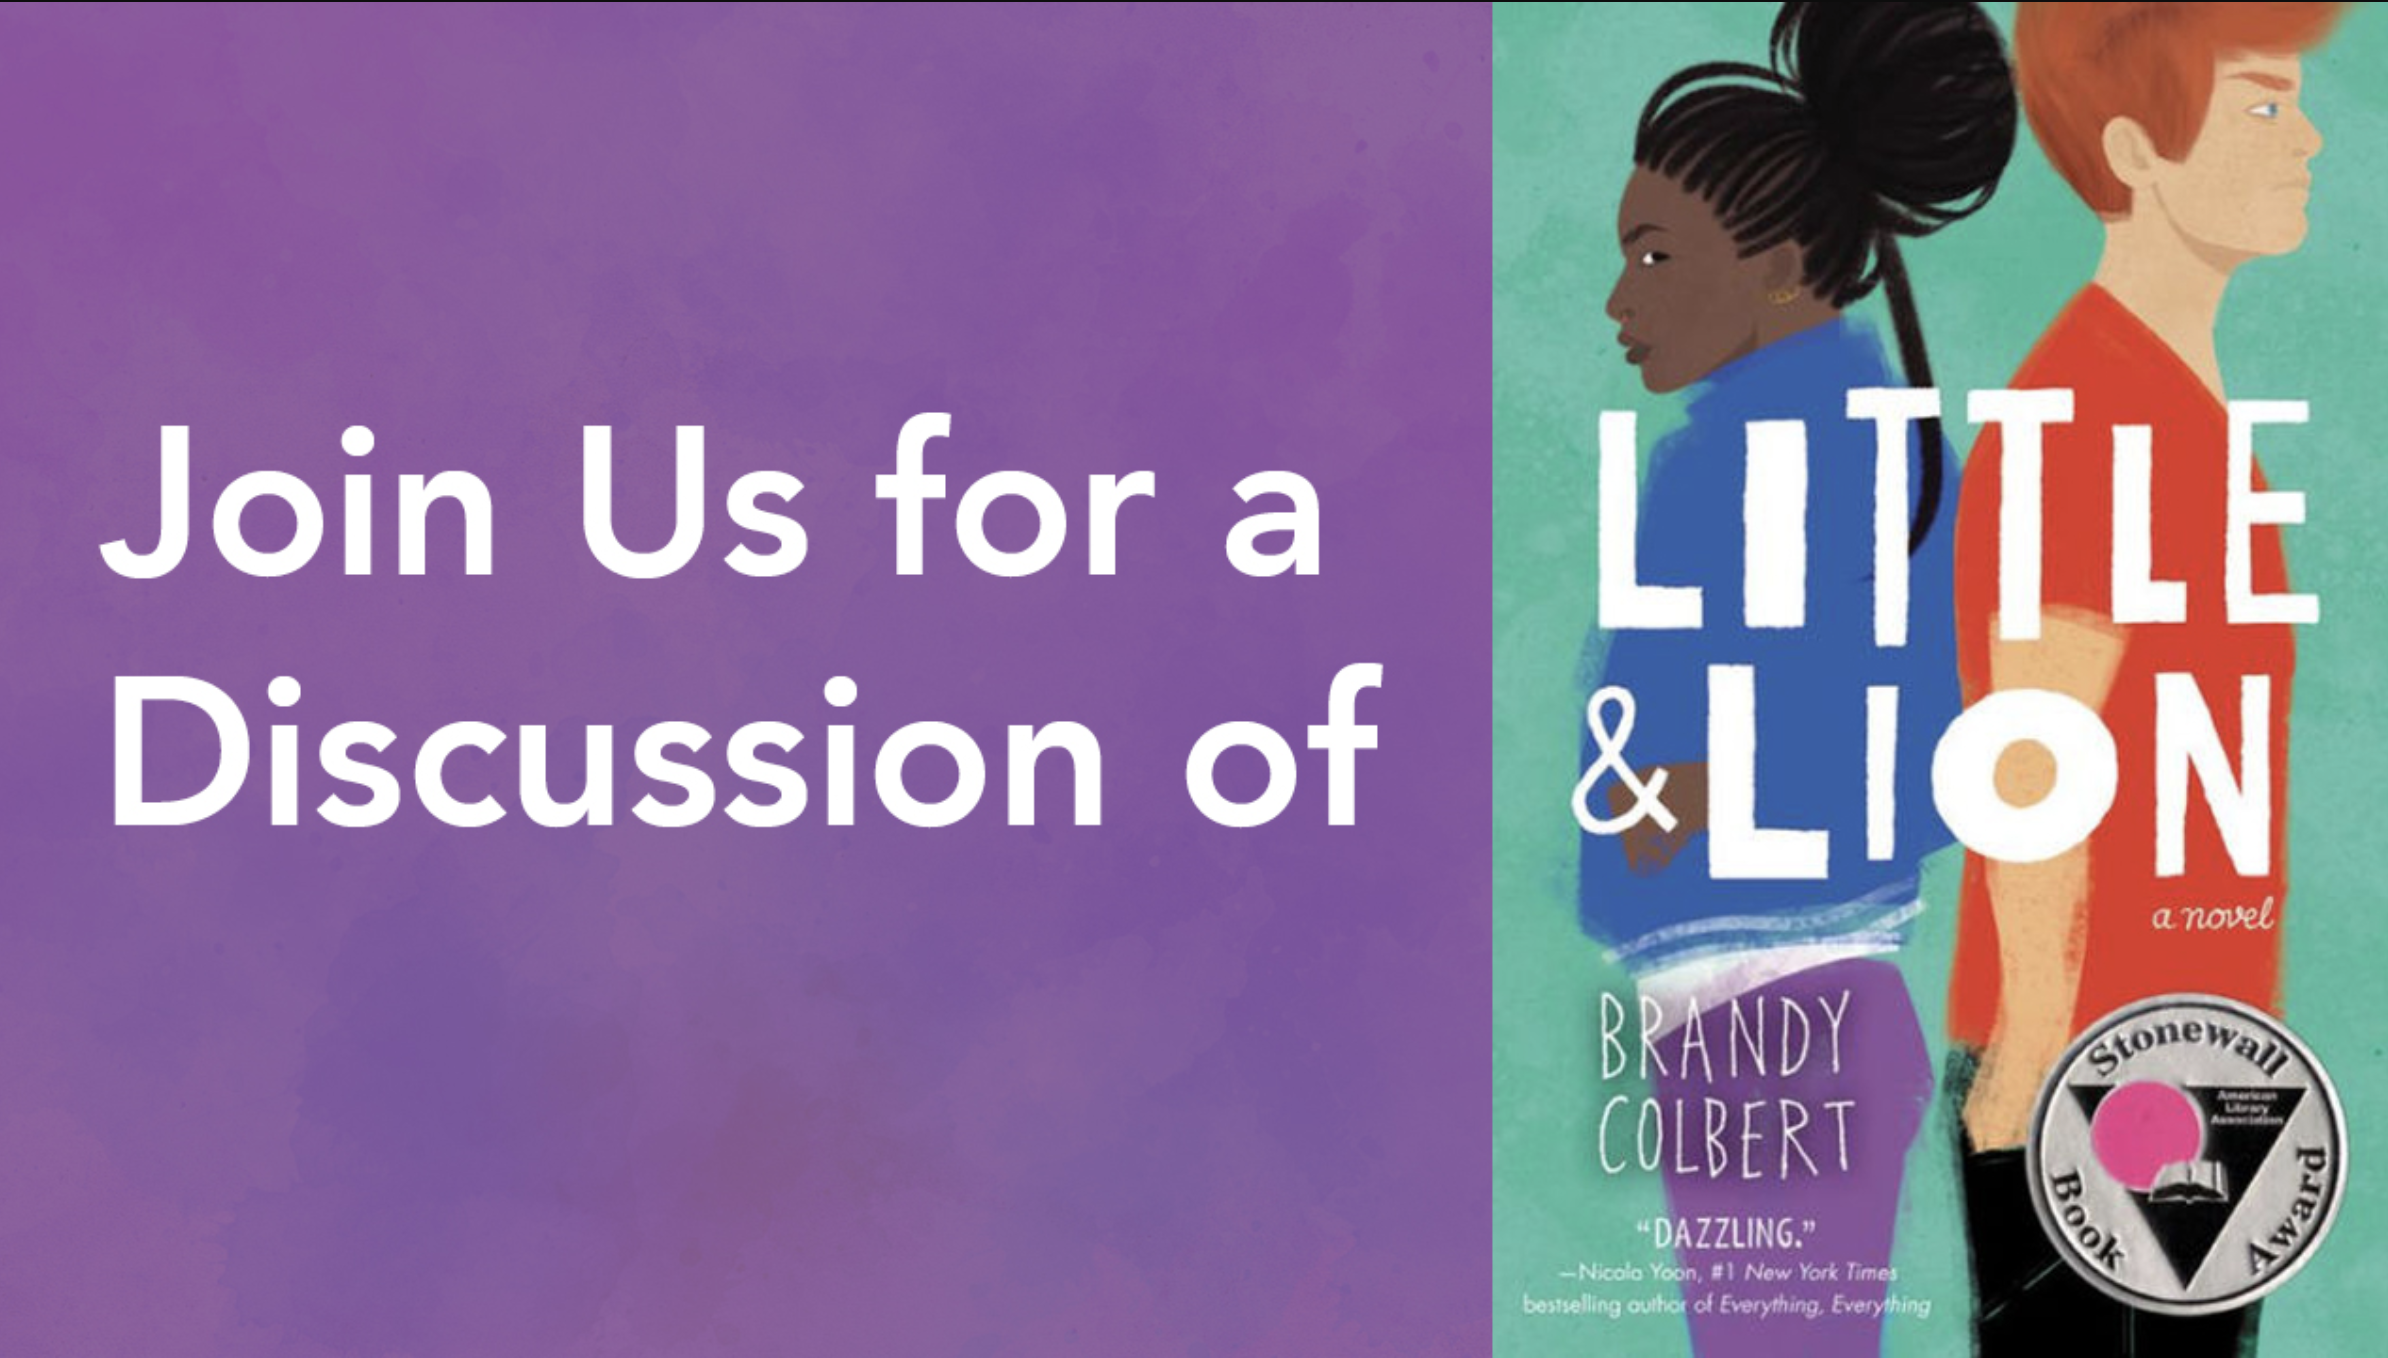 Join Us for a Discussion of Little and Lion